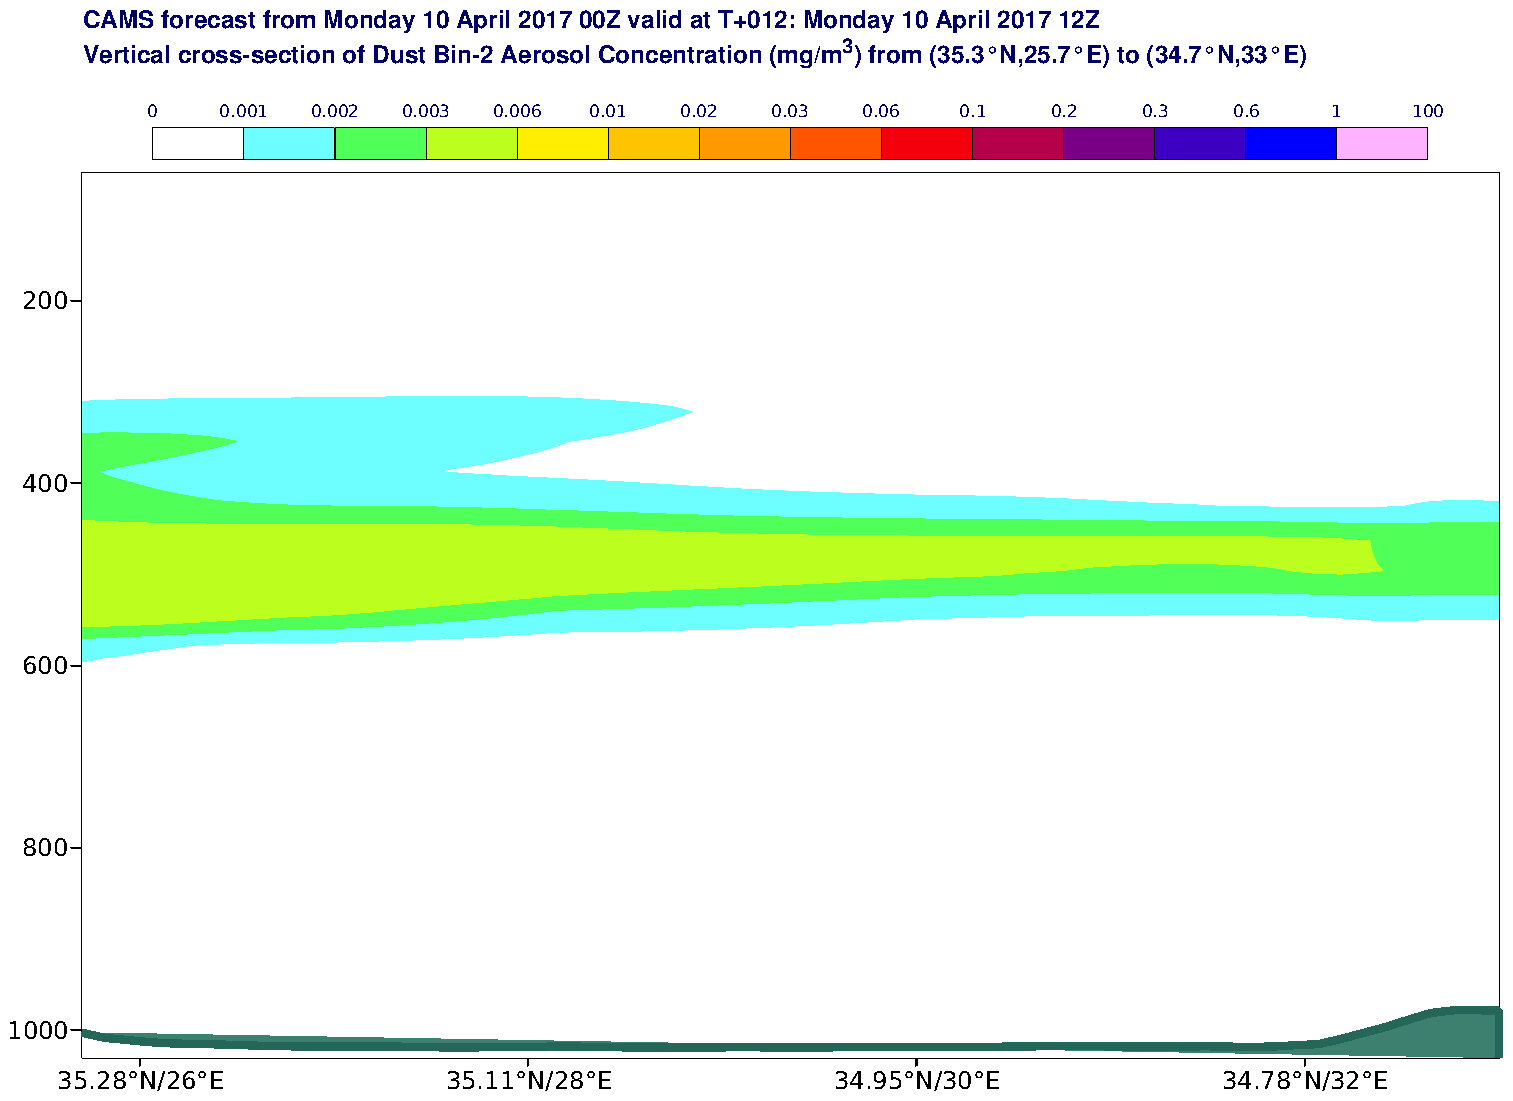 Vertical cross-section of Dust Bin-2 Aerosol Concentration (mg/m3) valid at T12 - 2017-04-10 12:00